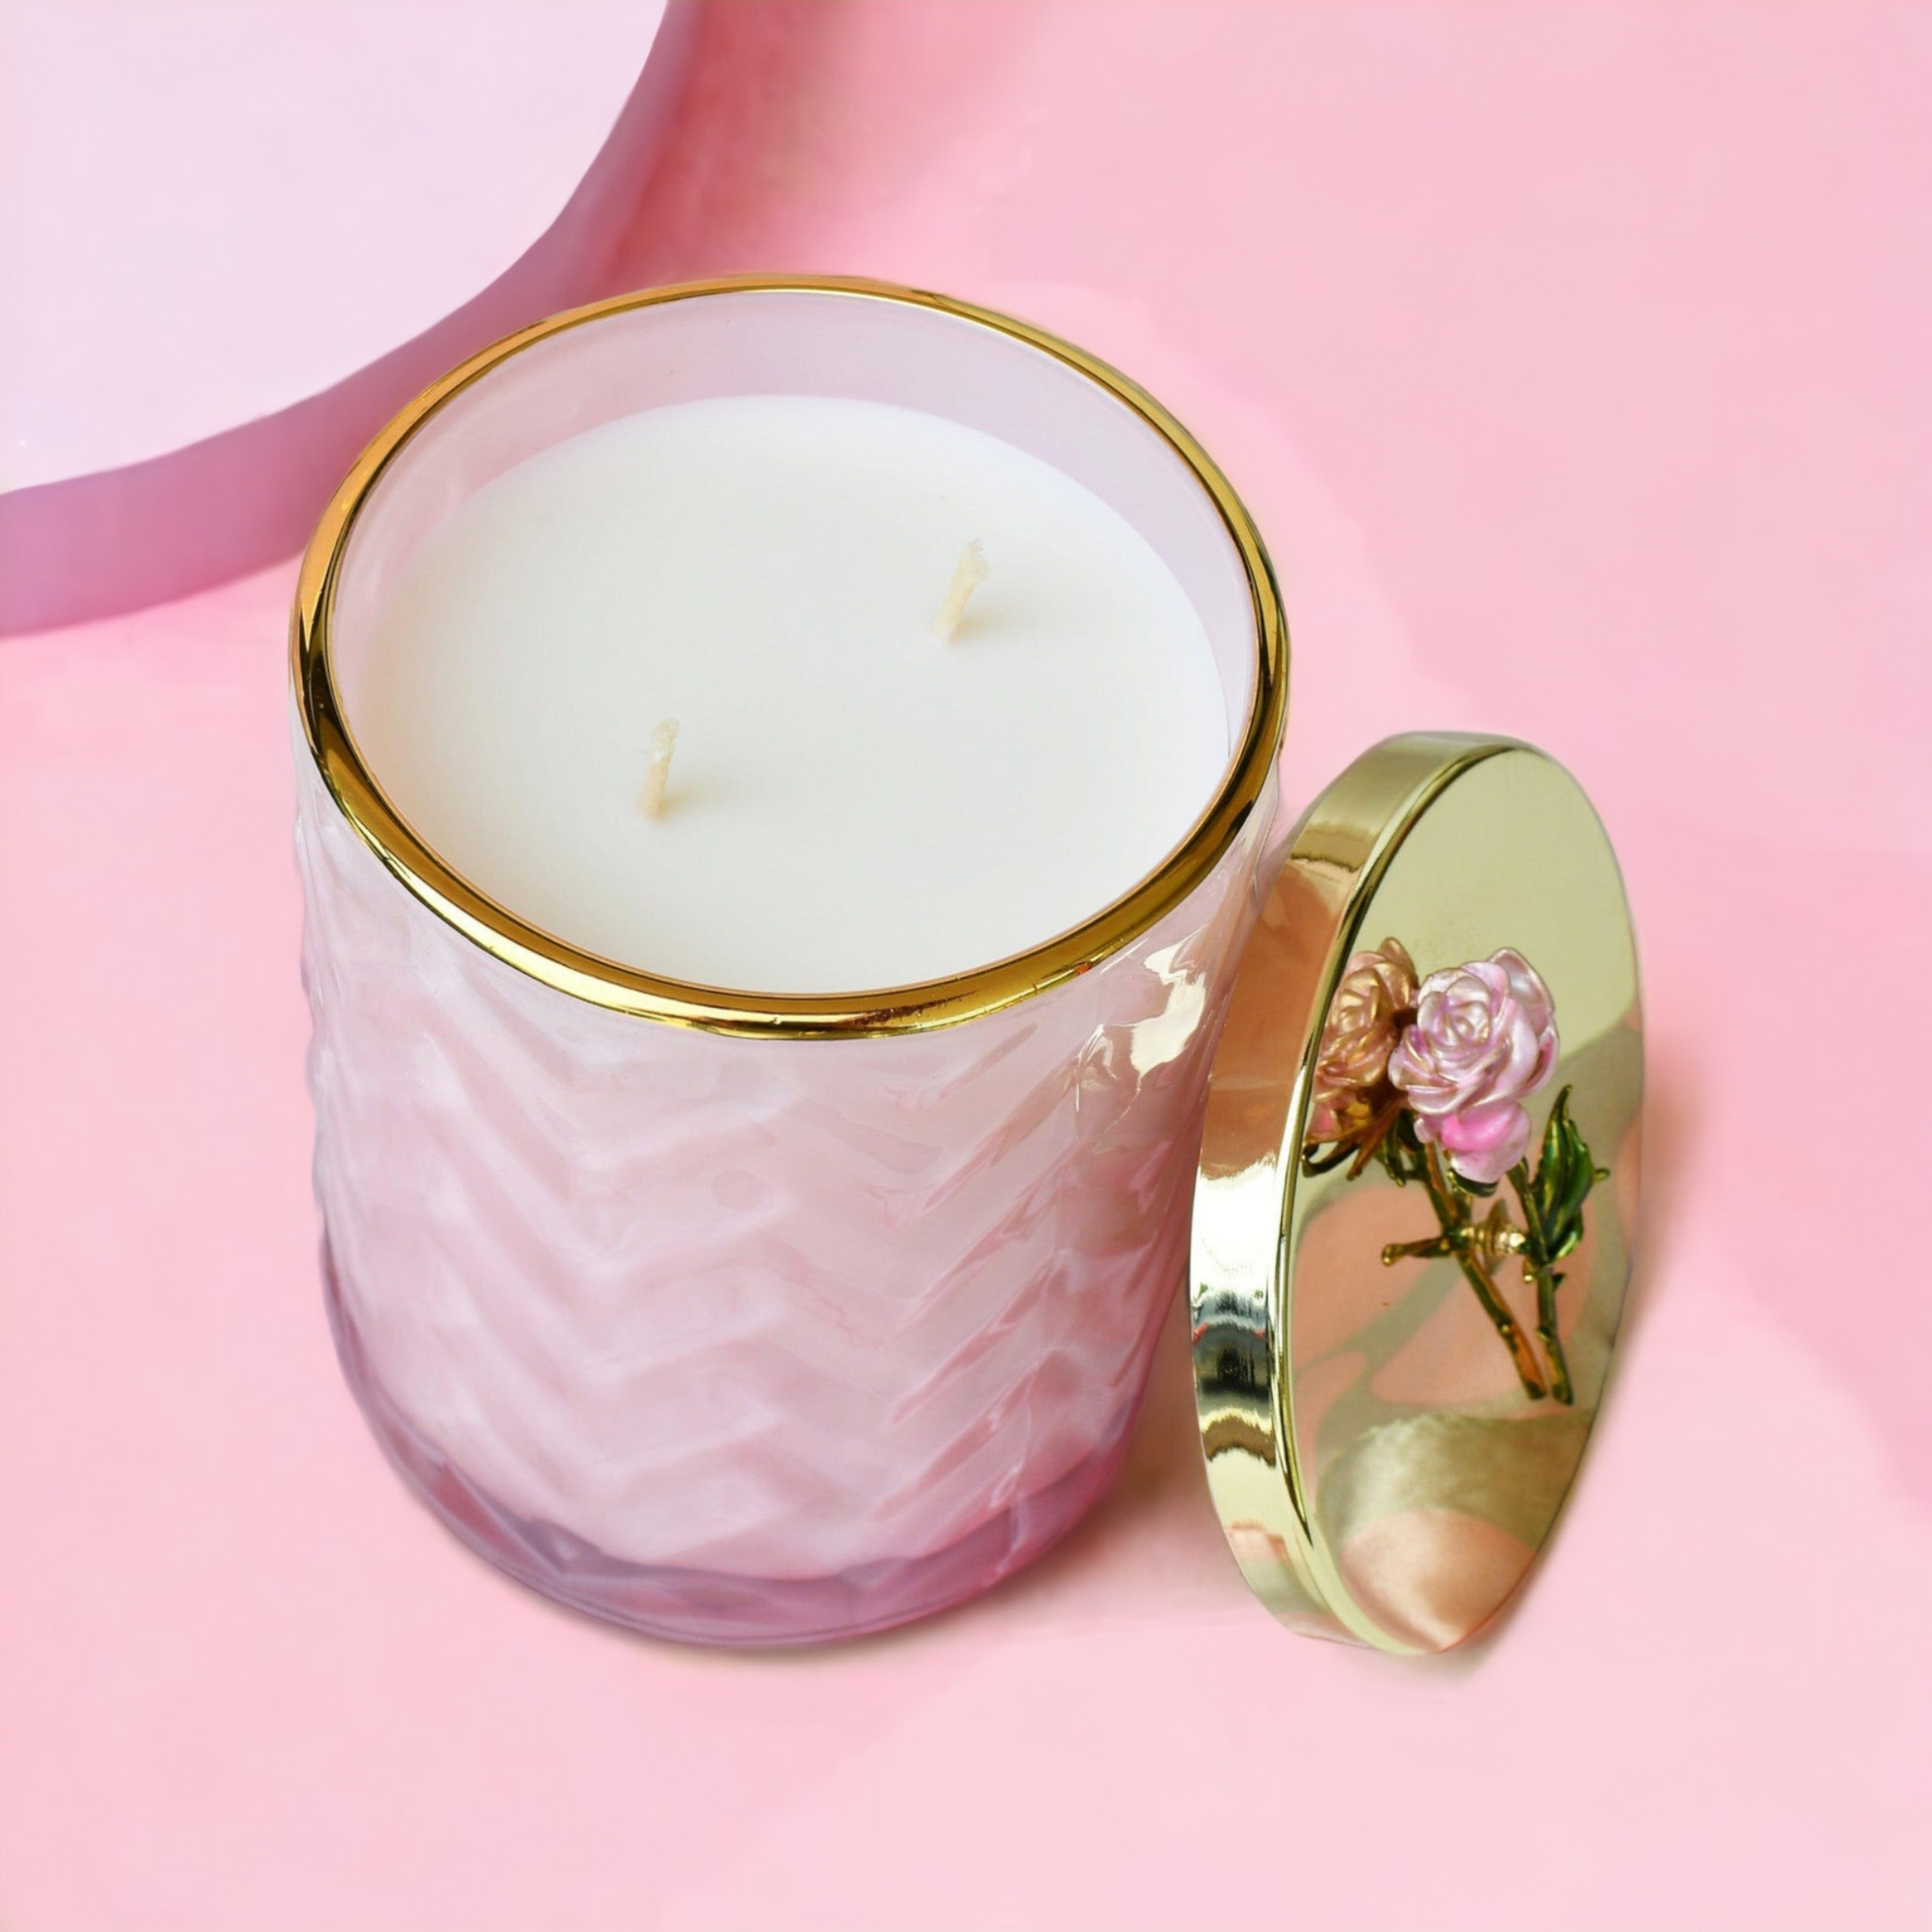 Cote Noire Pink Herringbone Candle with Scarf